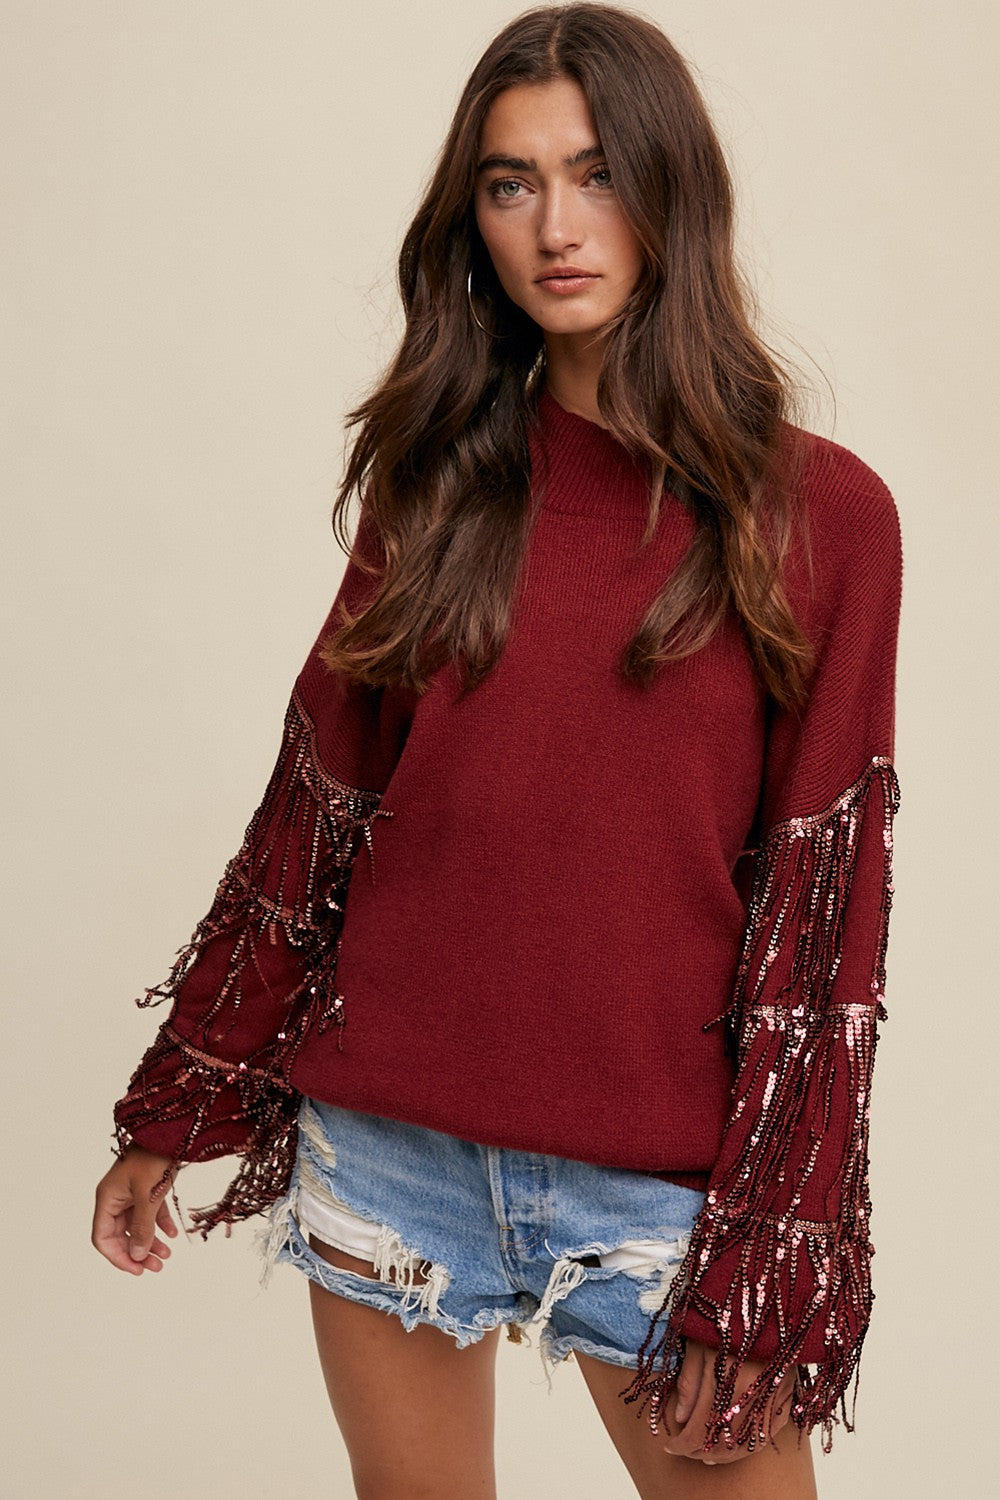 Wine Knit Sweater with Fringe Sequin Sleeves